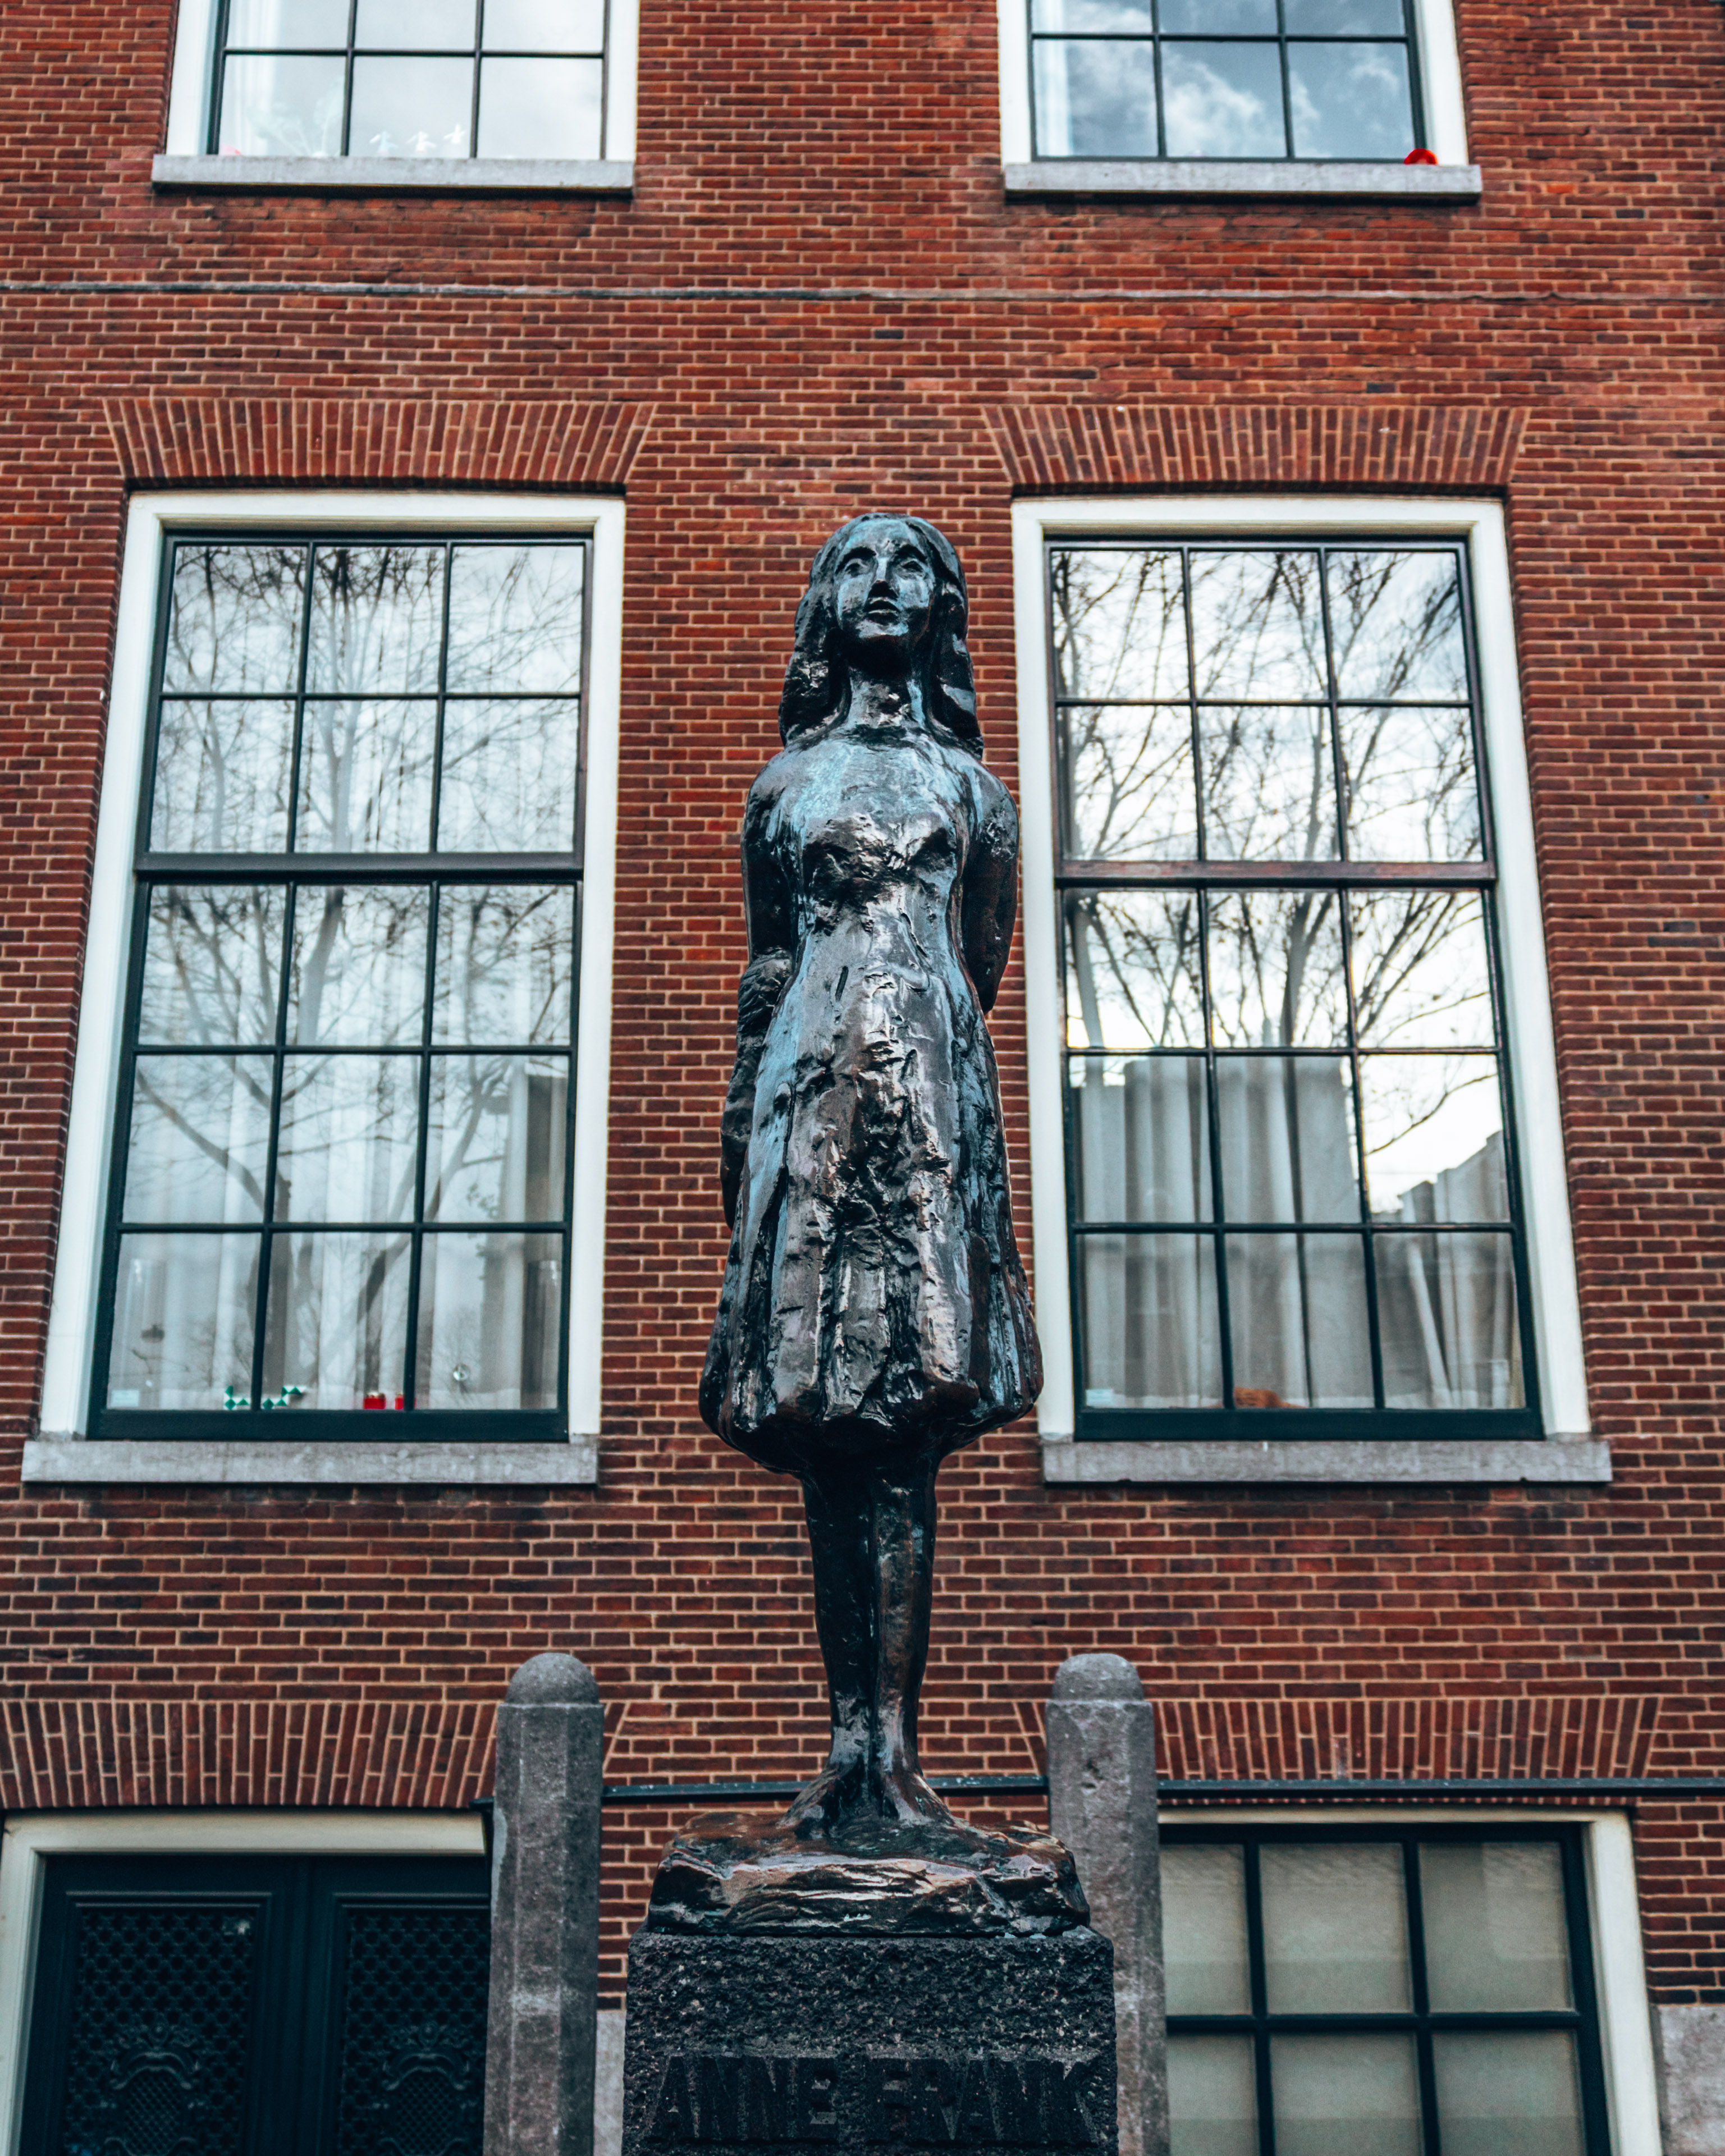 The Statue of Anne Frank in Amsterdam, Netherlands